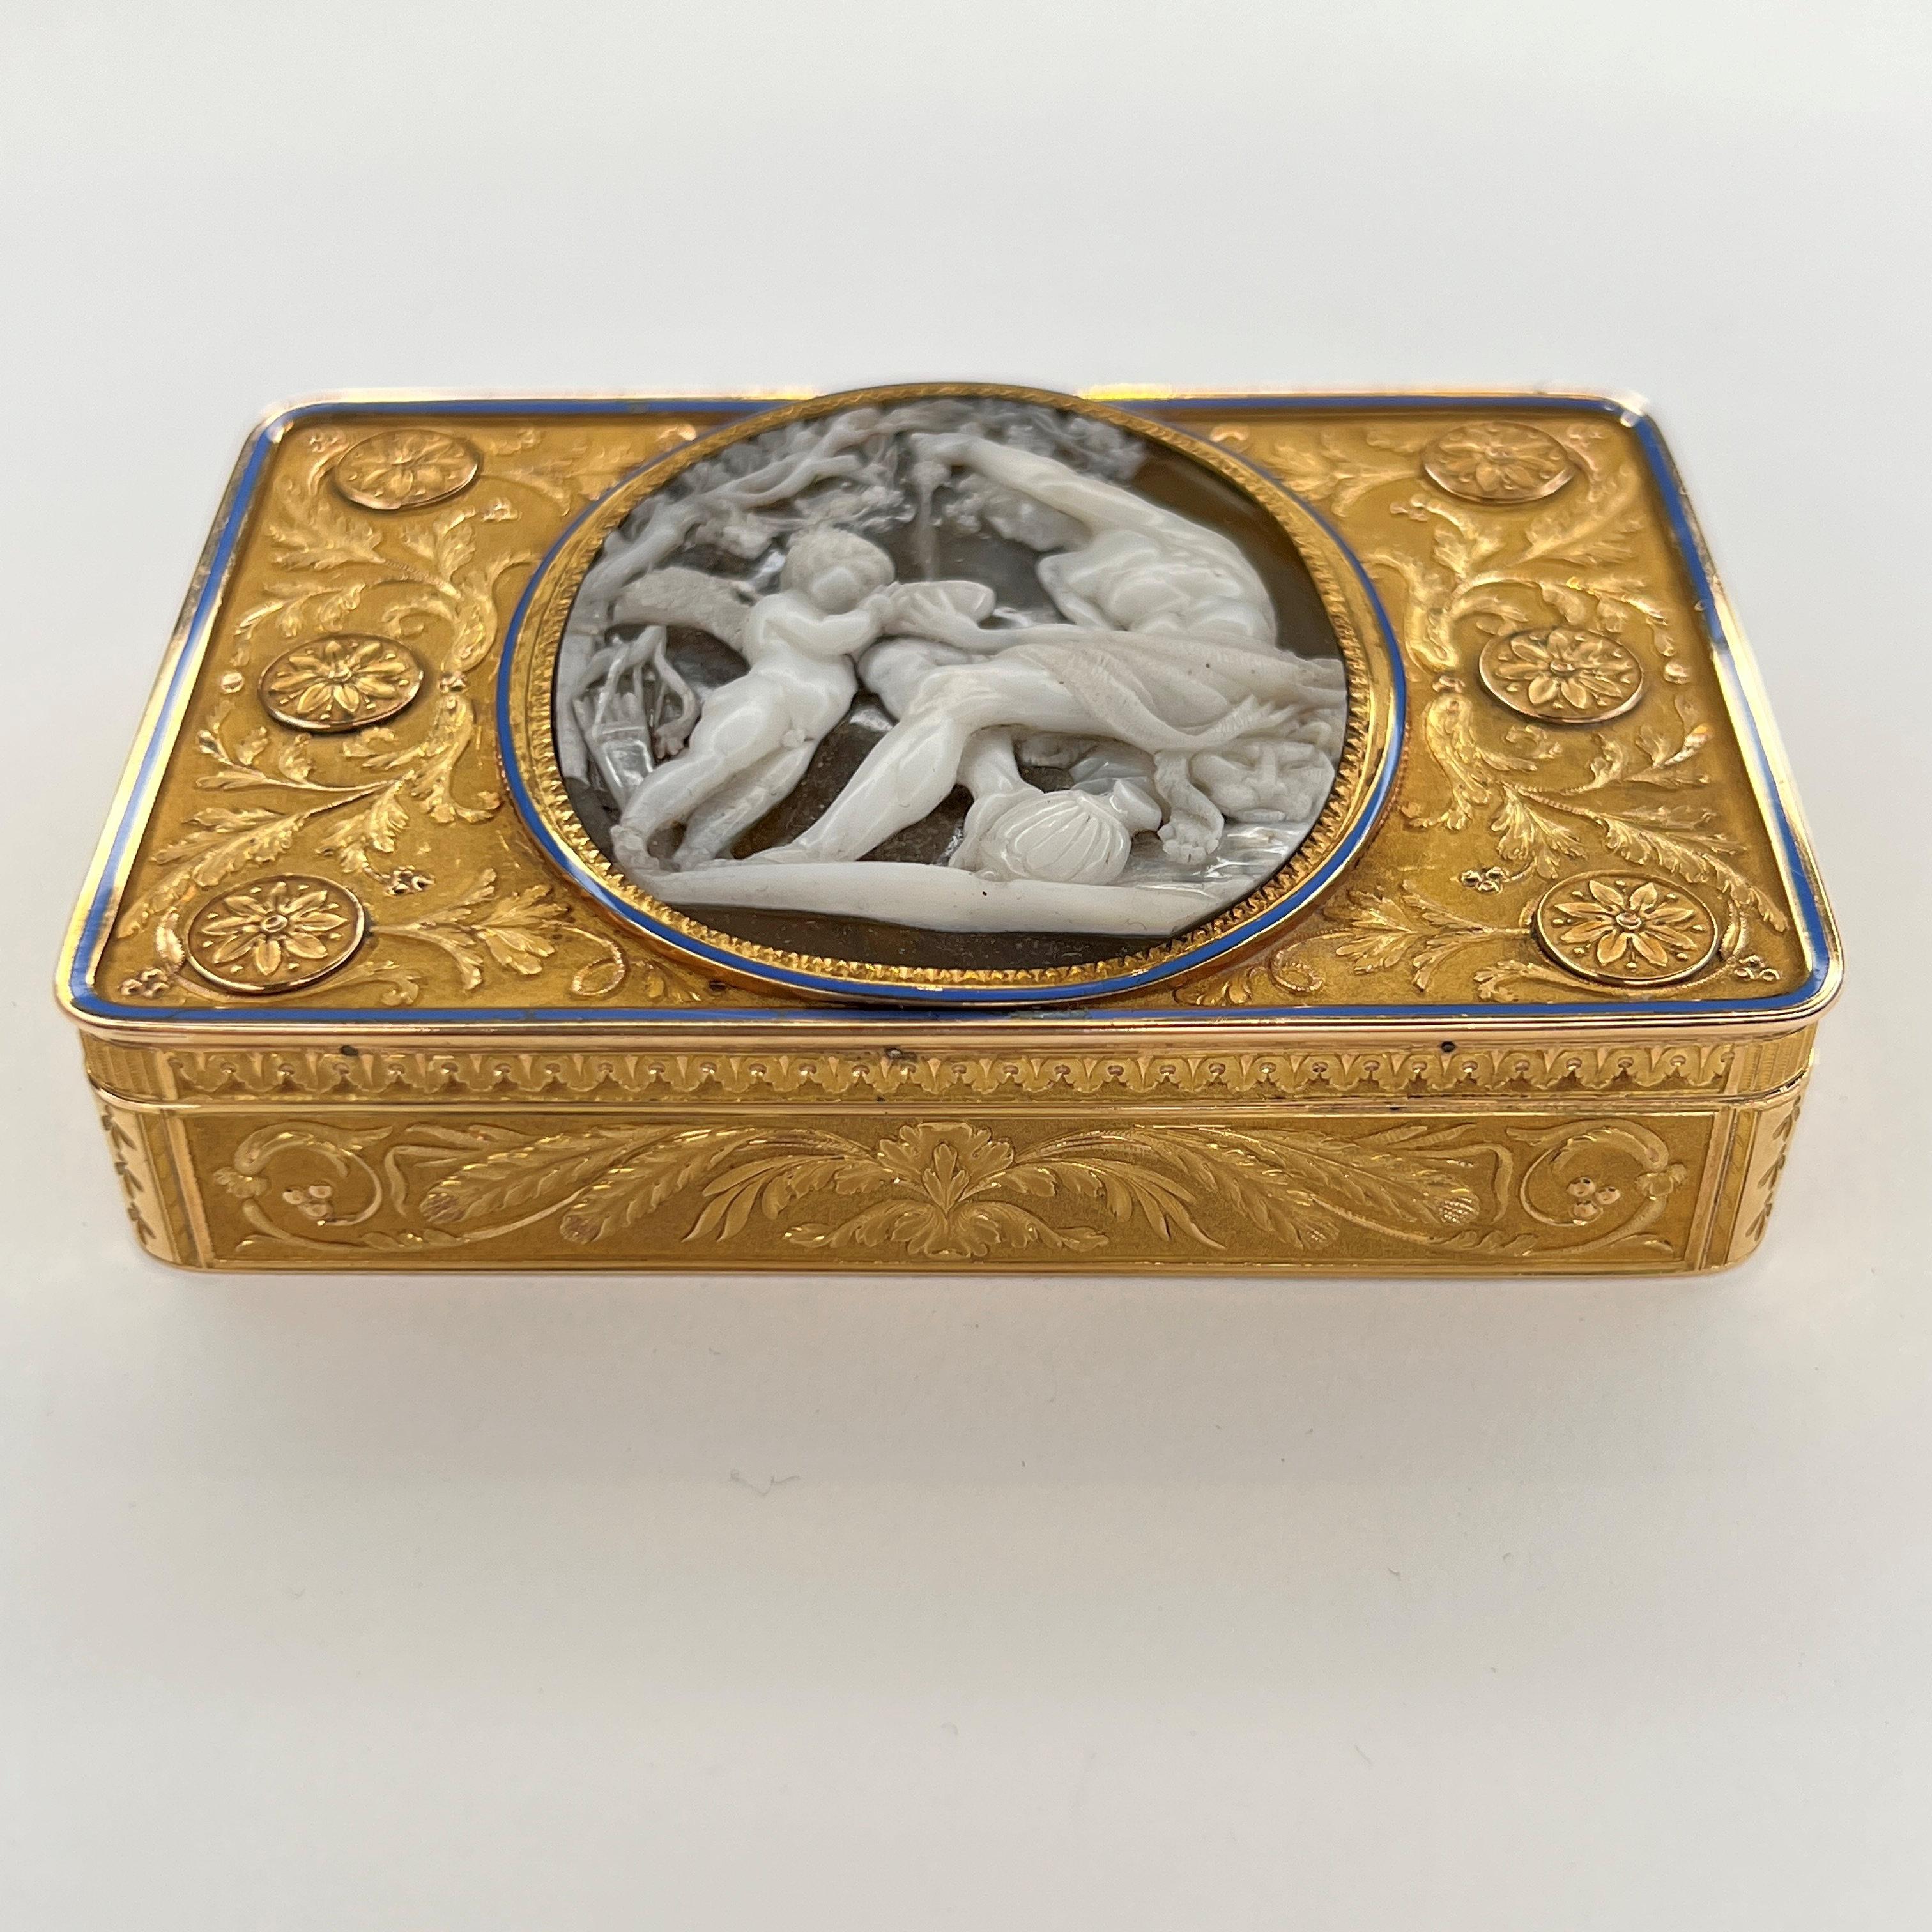 Neoclassical Revival Antique Russian Neoclassical Gold and Agate Snuff Box Circa 1820s For Sale